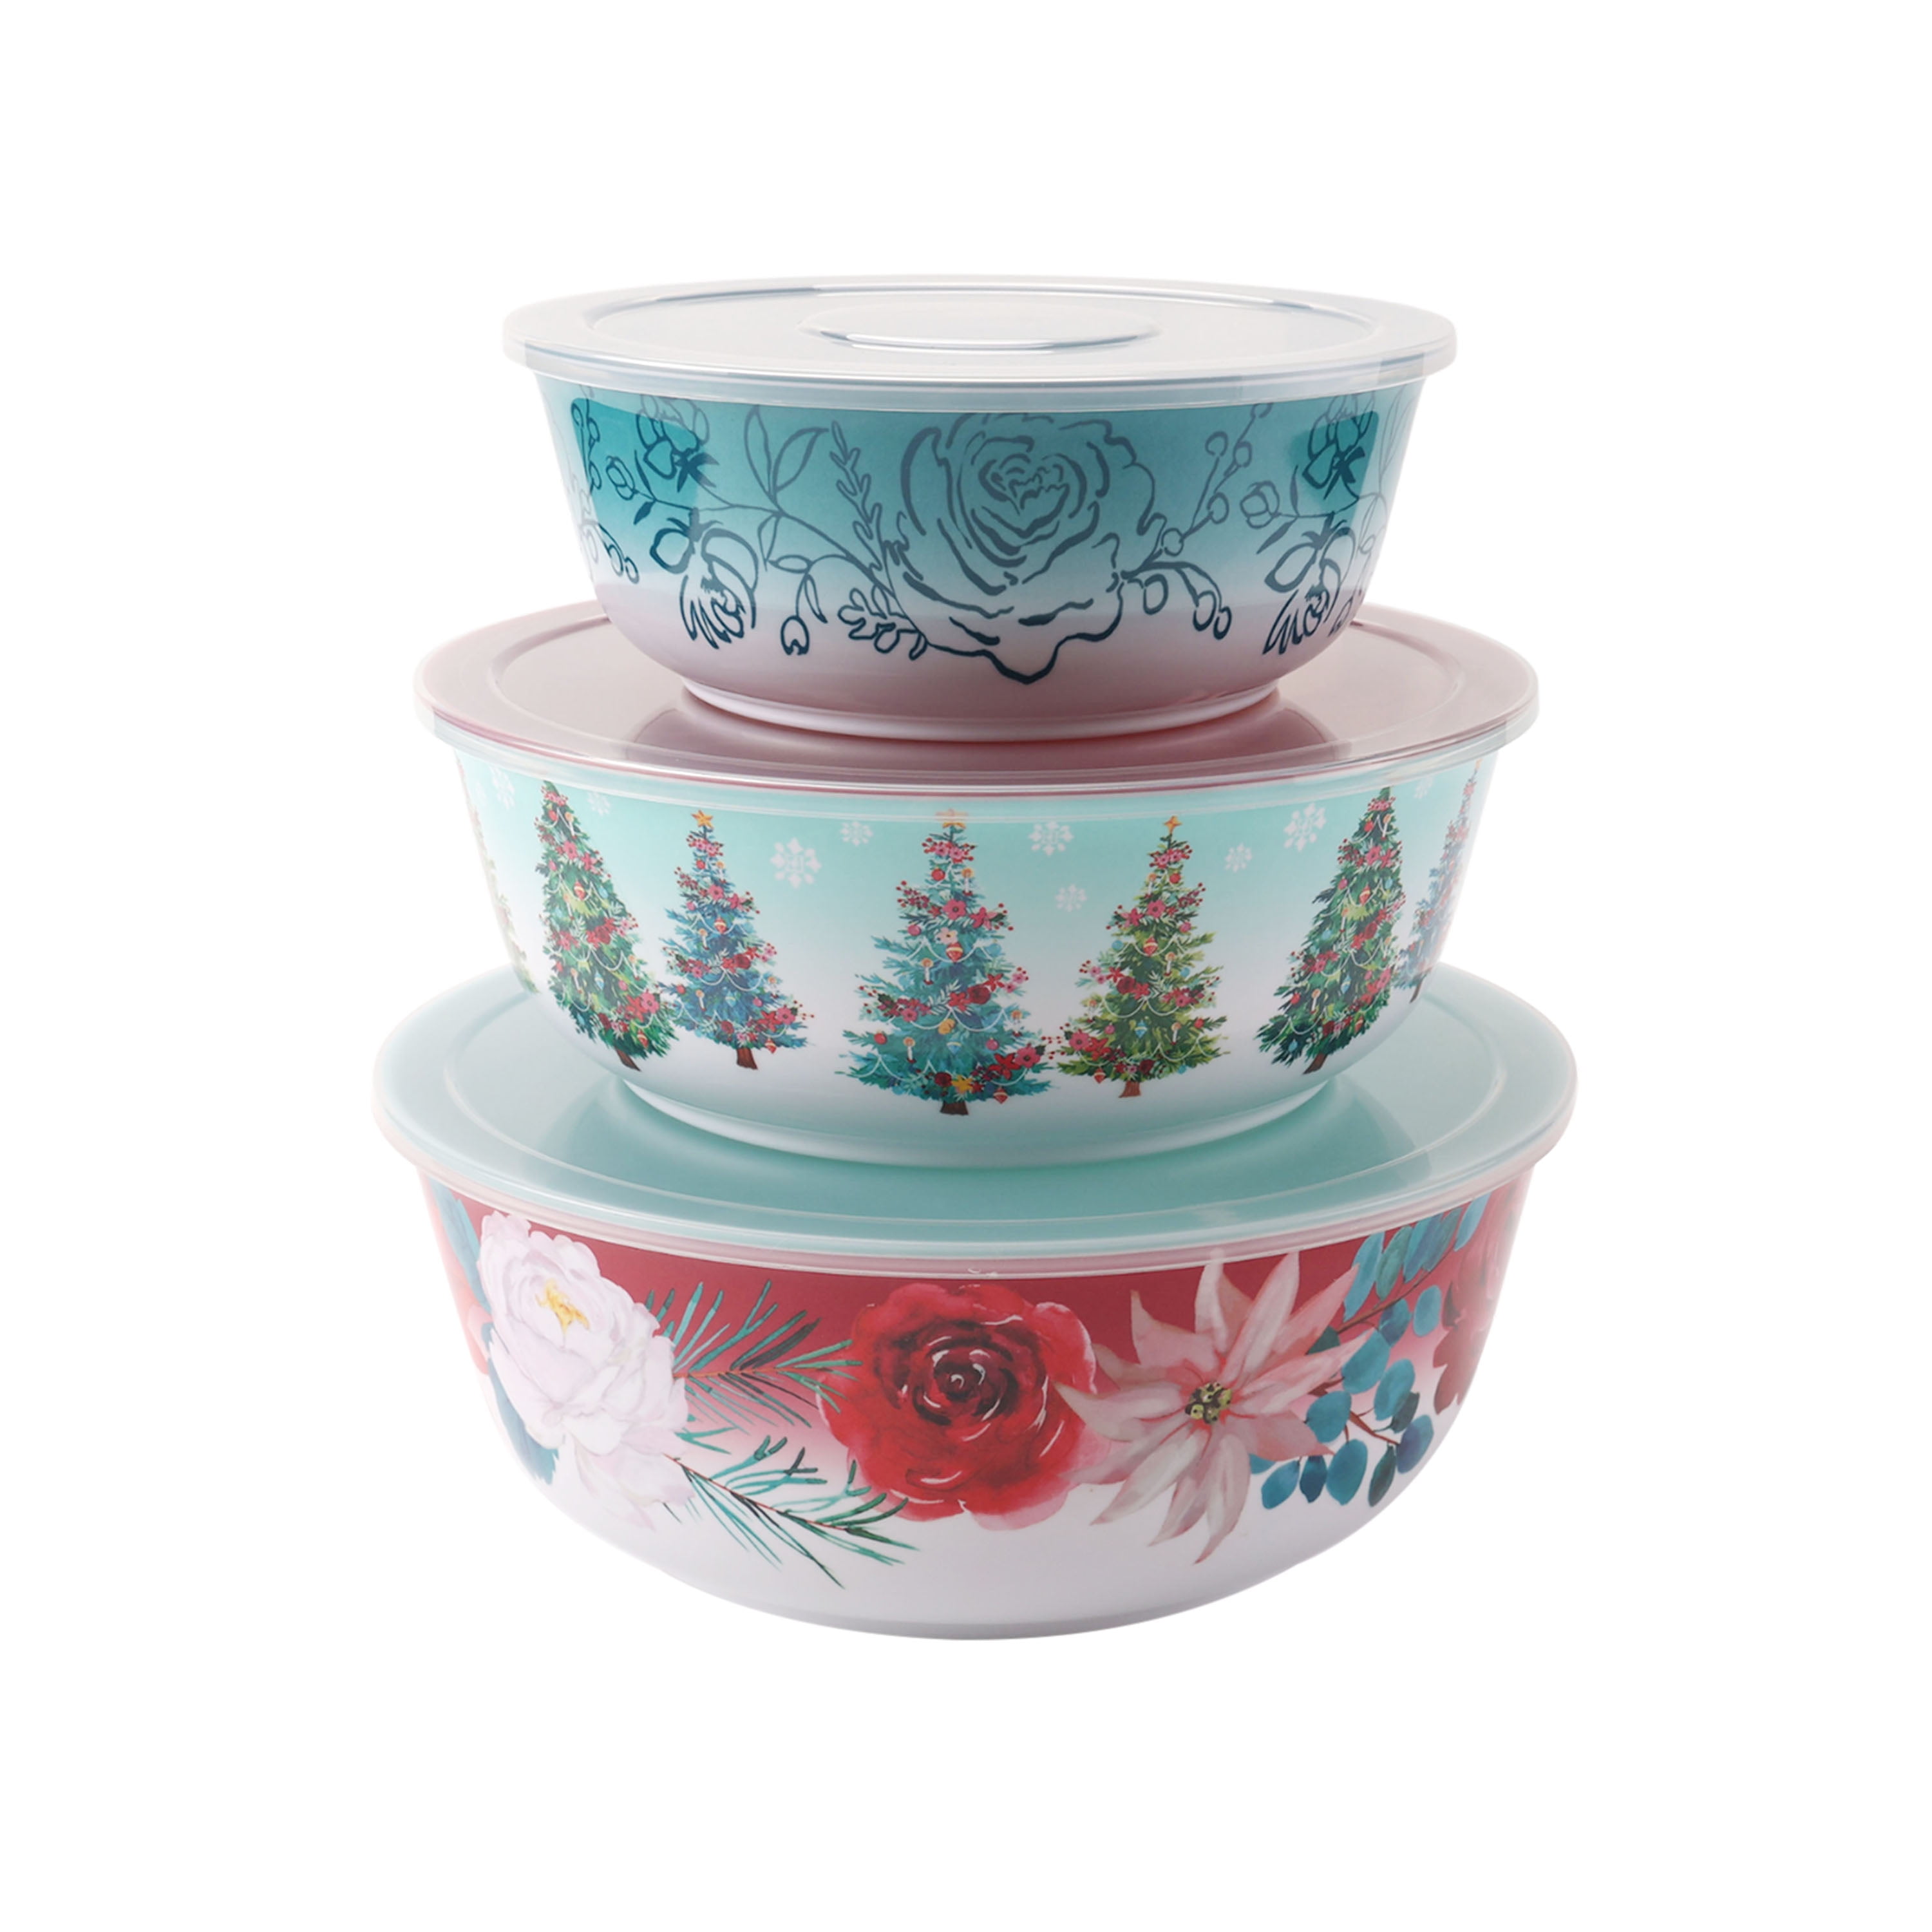 2, 3, and 4 L Melamine Mixing Bowl Set in Holiday Colors (Set of 3)